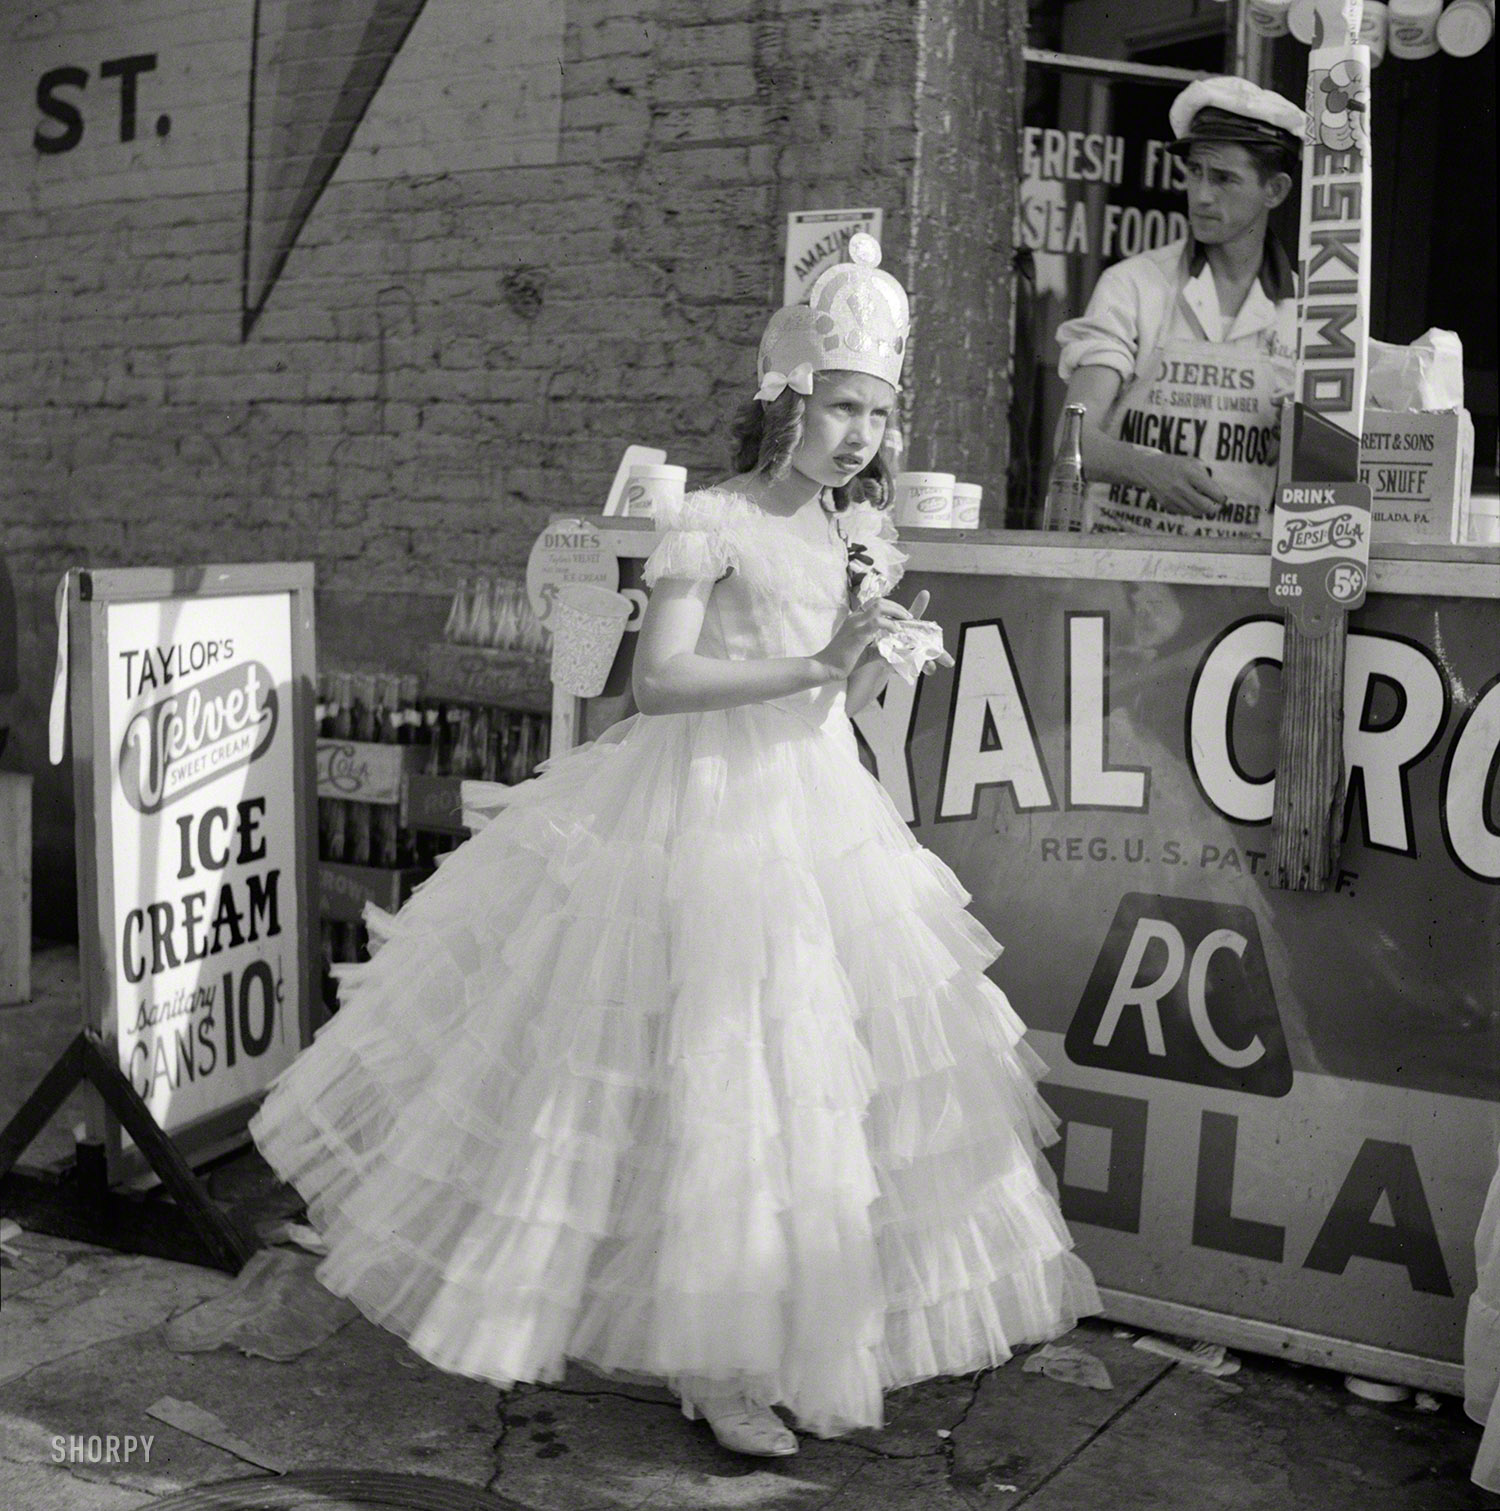 May 1940. "Cotton carnival. Memphis, Tennessee." Waiting for her Royal Crown. Medium format negative by Marion Post Wolcott. View full size.